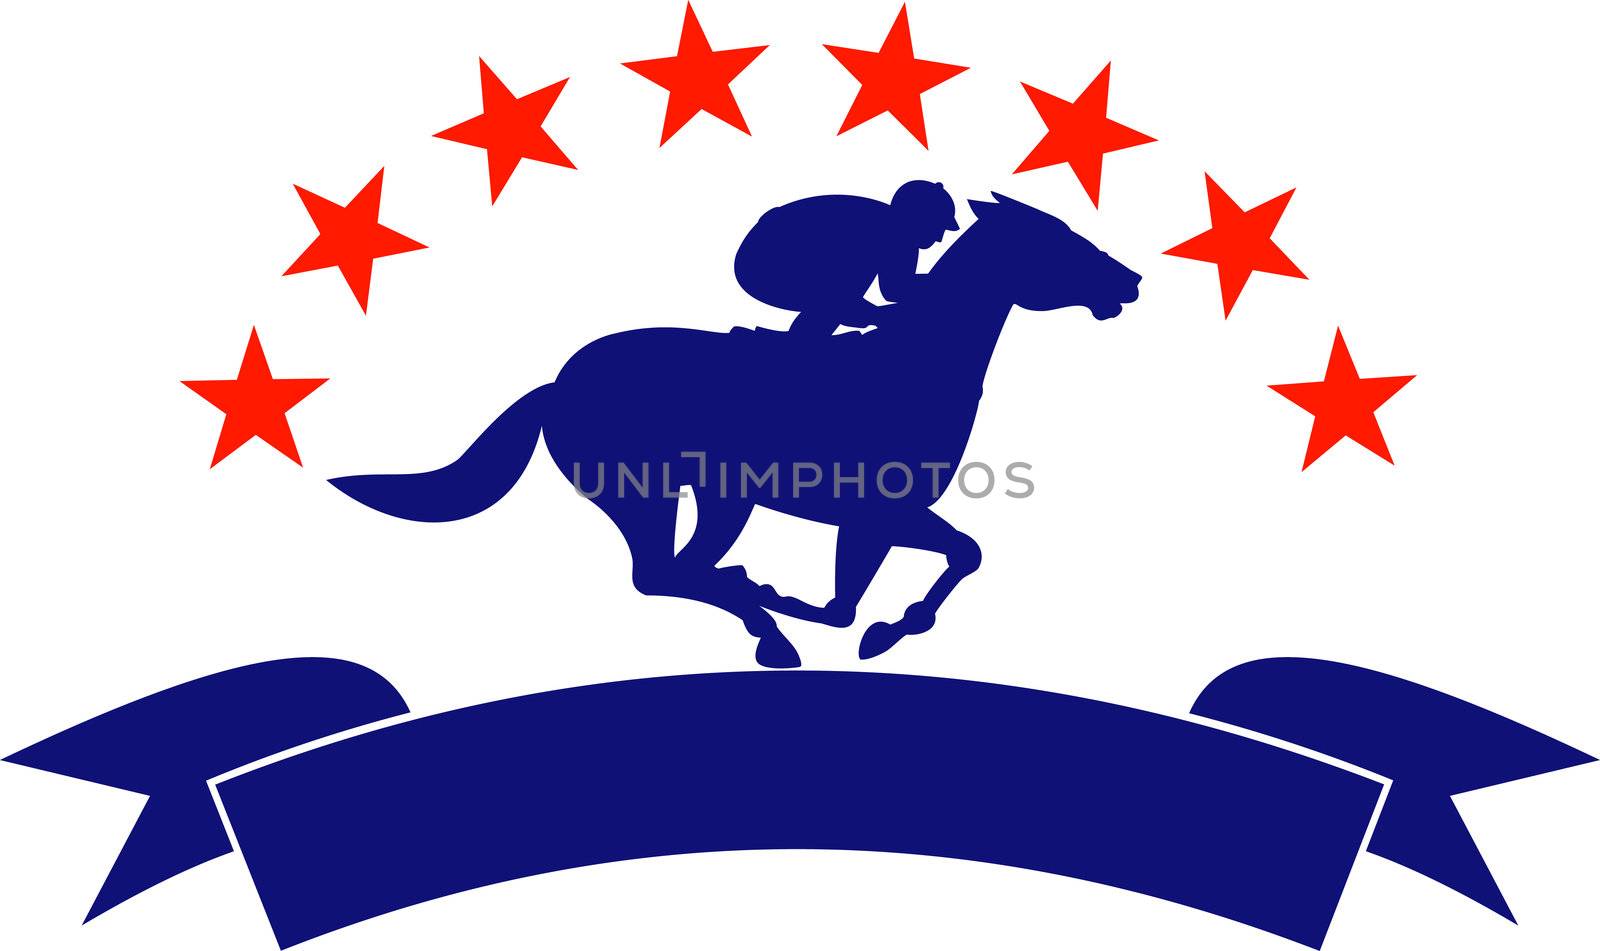 illustration of a horse and jockey racing silhouette with scroll in front and stars in background isolated on white